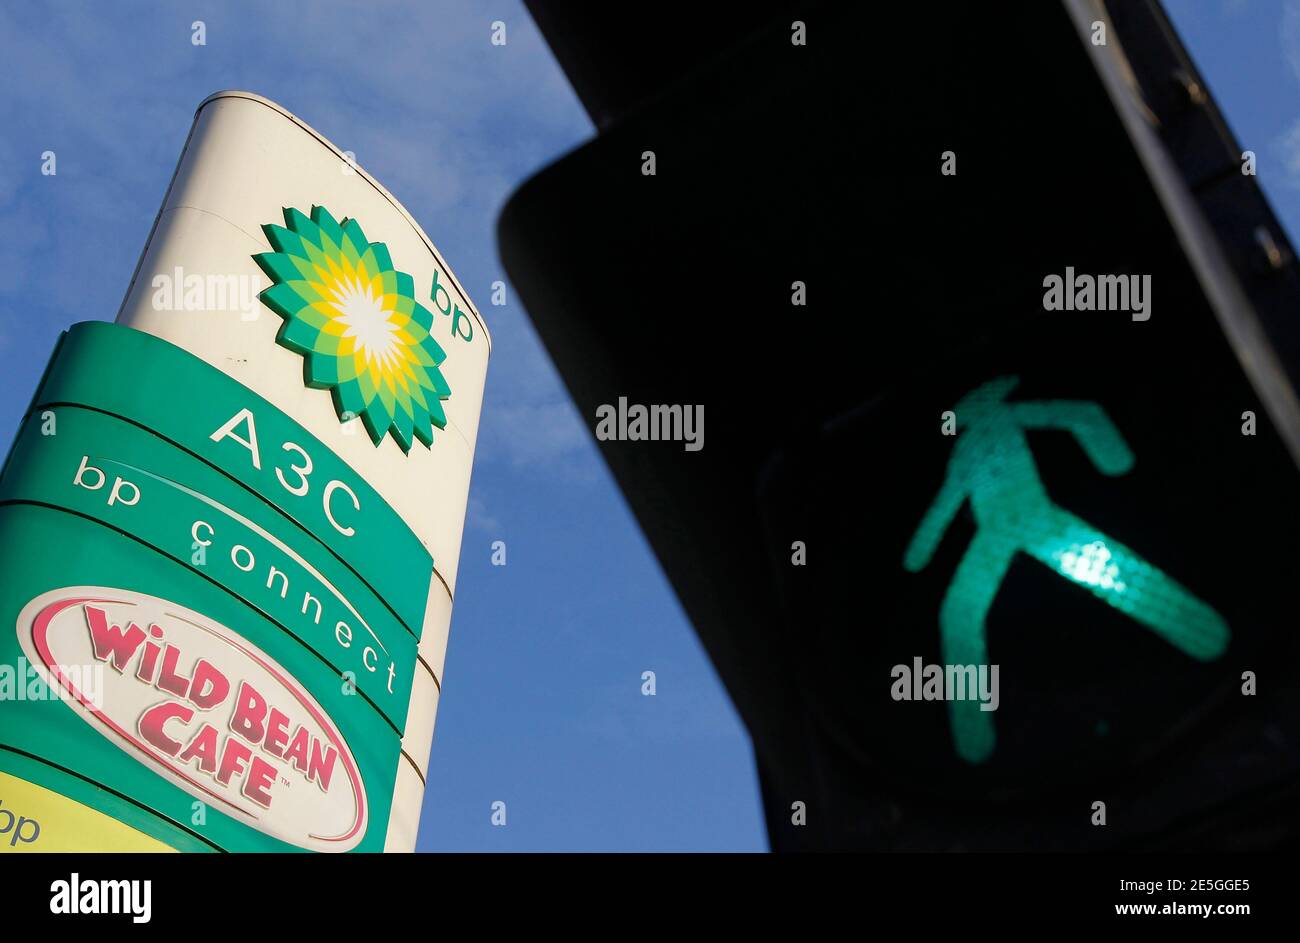 Traffic lights are seen near a BP petrol station in Moscow June 1, 2012. A Russian state firm has offered to buy BP Plc's half share in its Siberian joint venture, a source said on Friday, in what would amount to a stunning reversal for the British firm and a bold assertion of Kremlin control over the oil sector.  REUTERS/Denis Sinyakov  (RUSSIA - Tags: BUSINESS ENERGY) Stock Photo